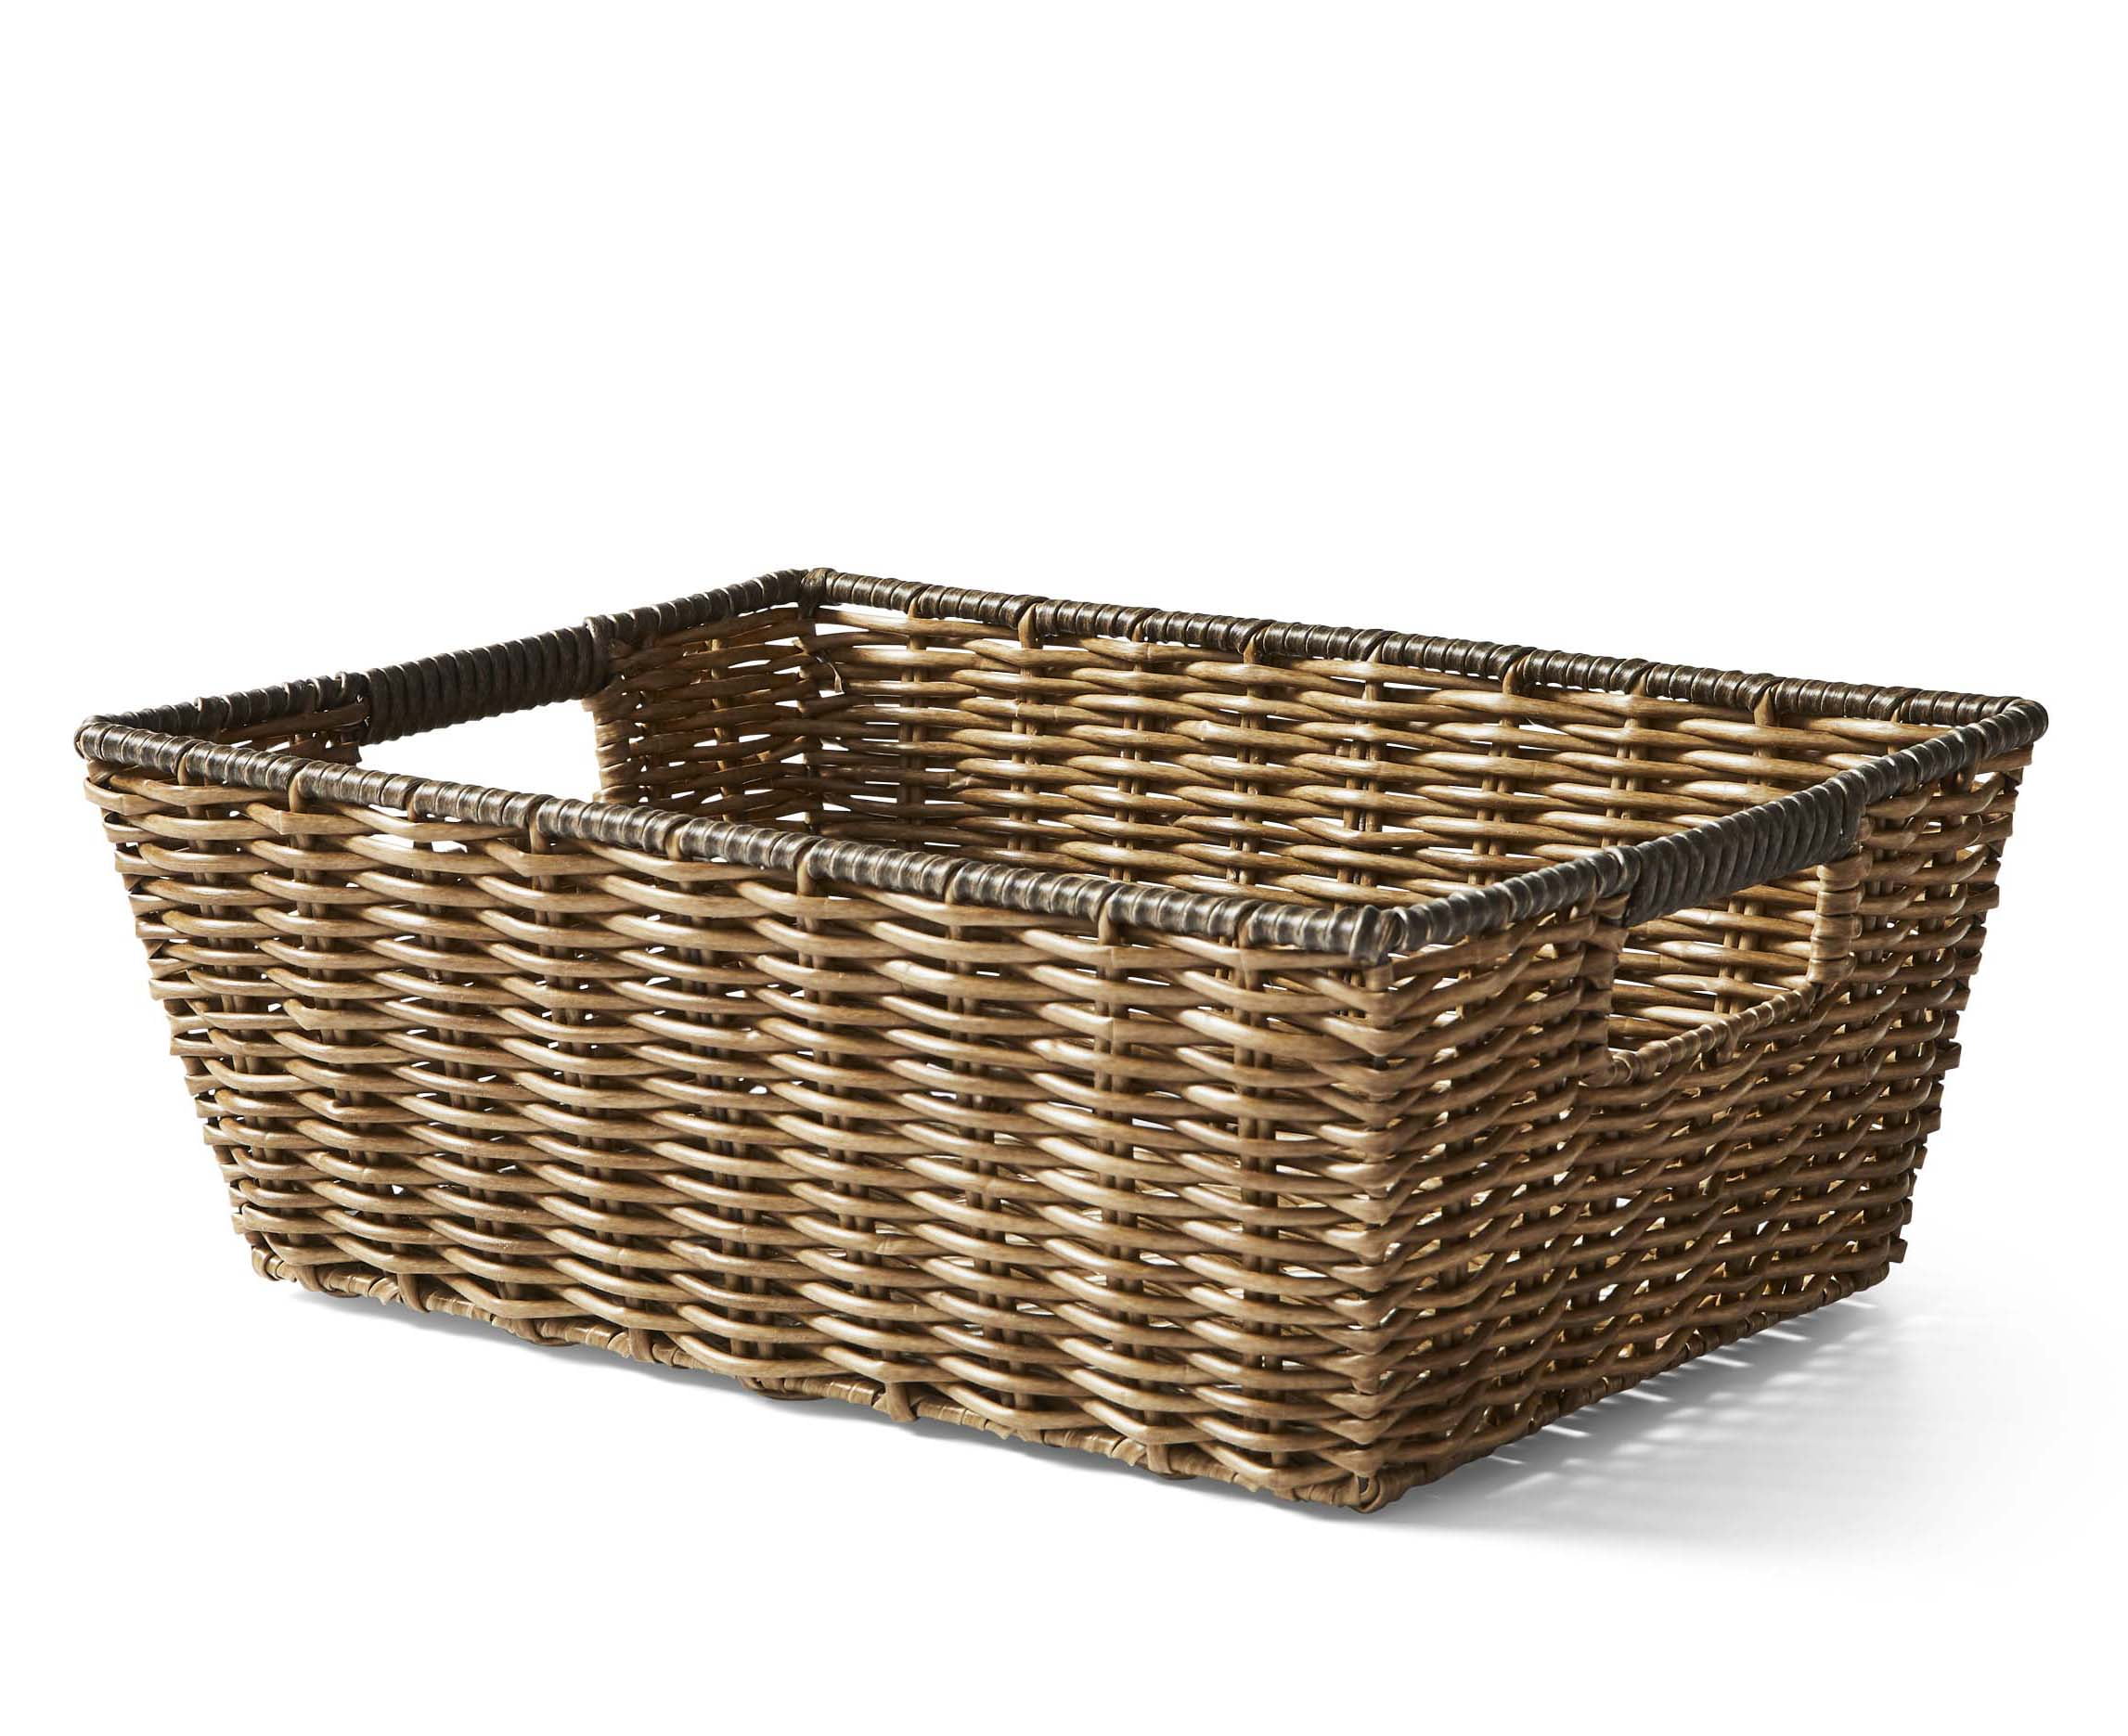 Poly & Better Homes Gardens Cut-Out with The Handles Rattan Basket Storage